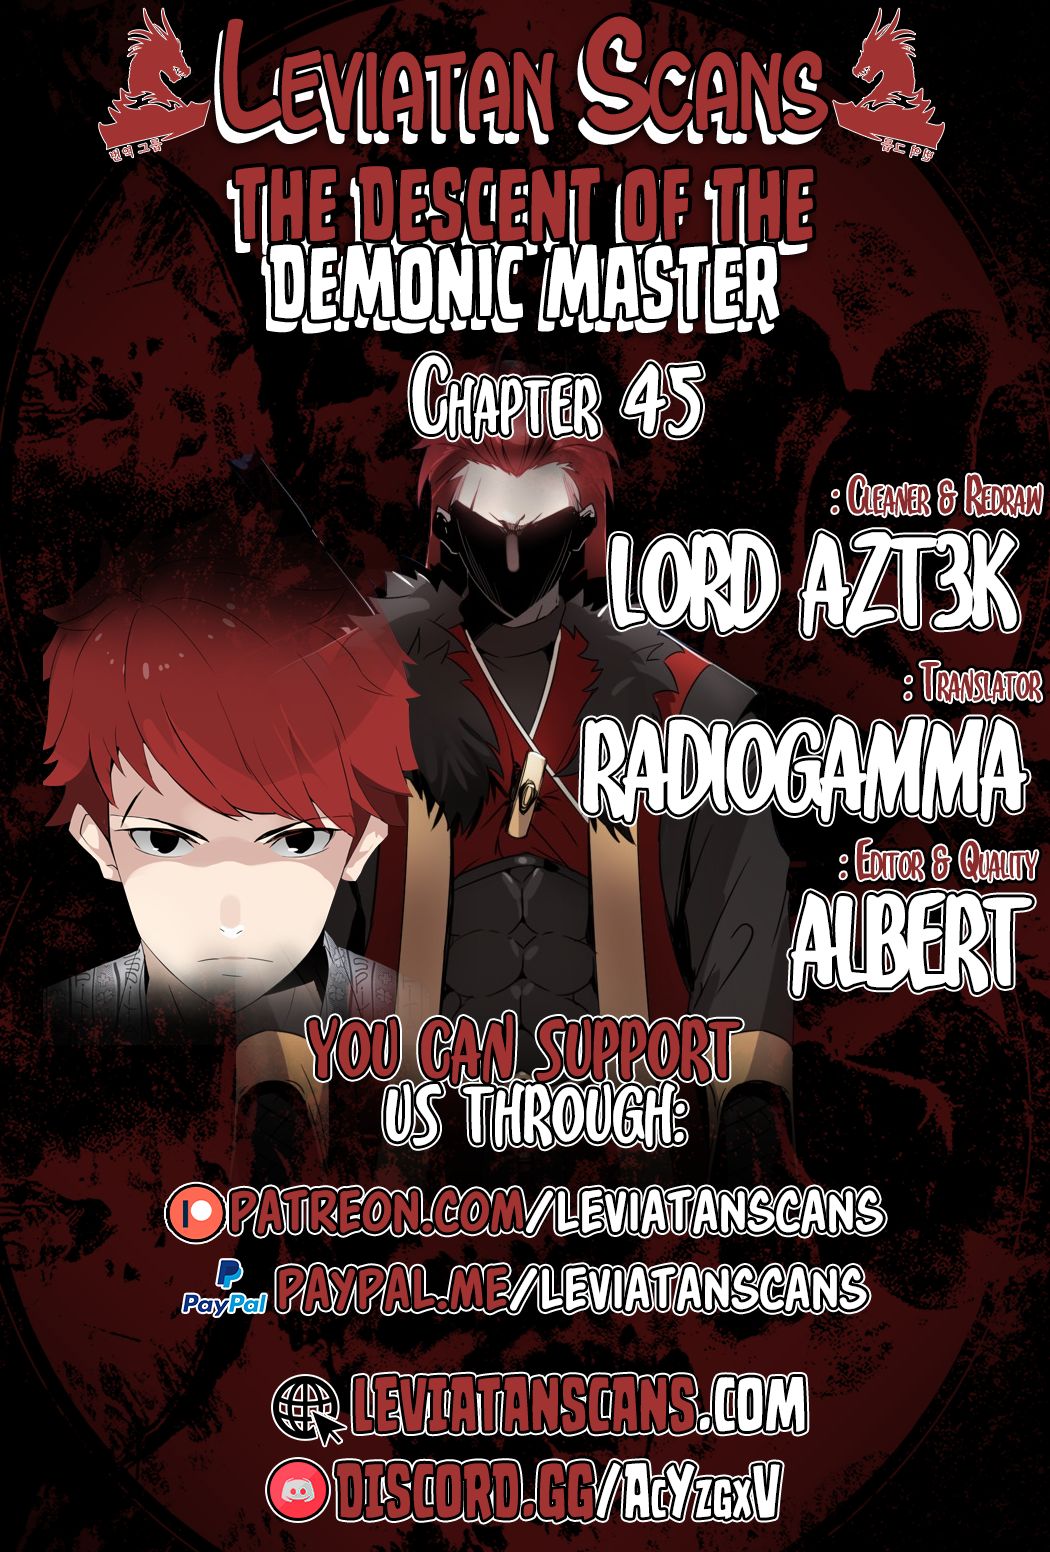 The Descent Of The Demonic Master Chapter 45